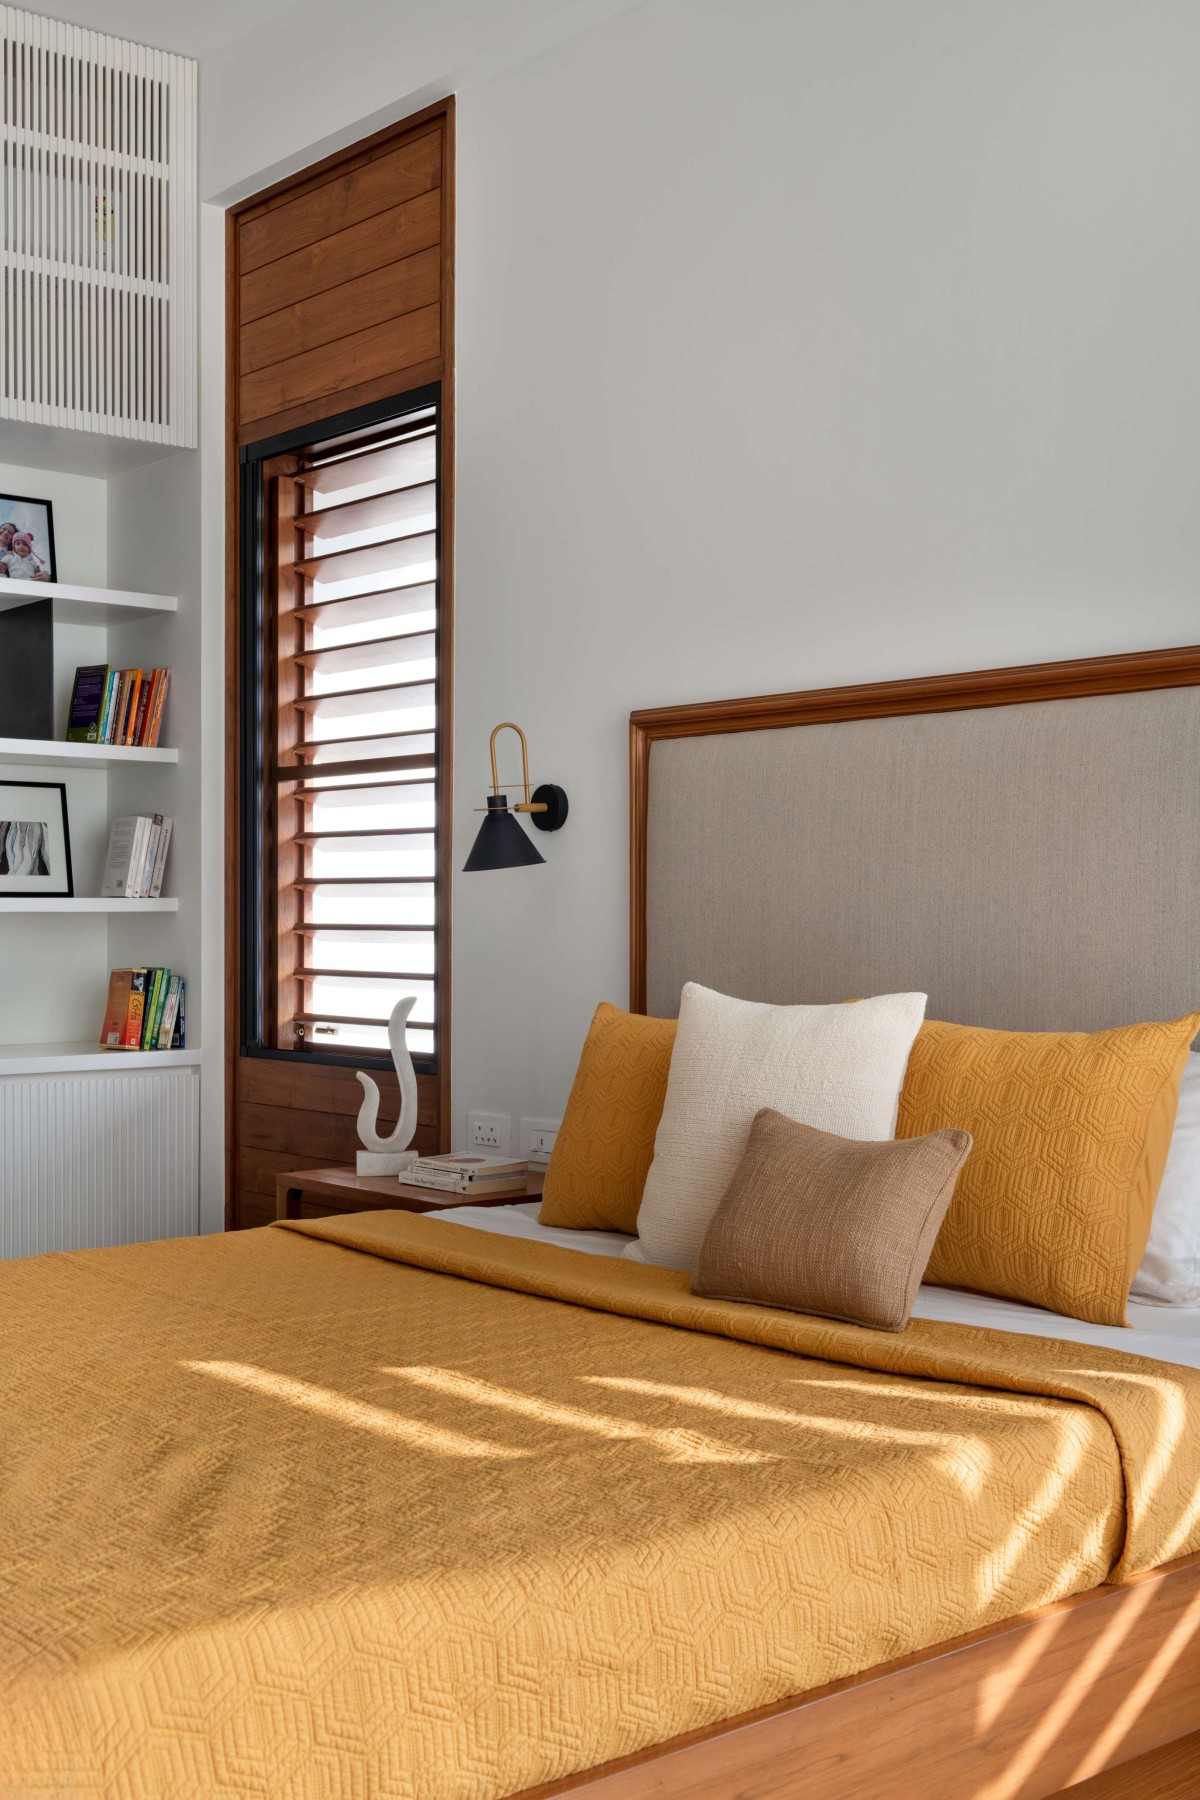 Master bedroom of Hovering House of Parikhs by Anarr Gunjaria Interiors and Modo Design